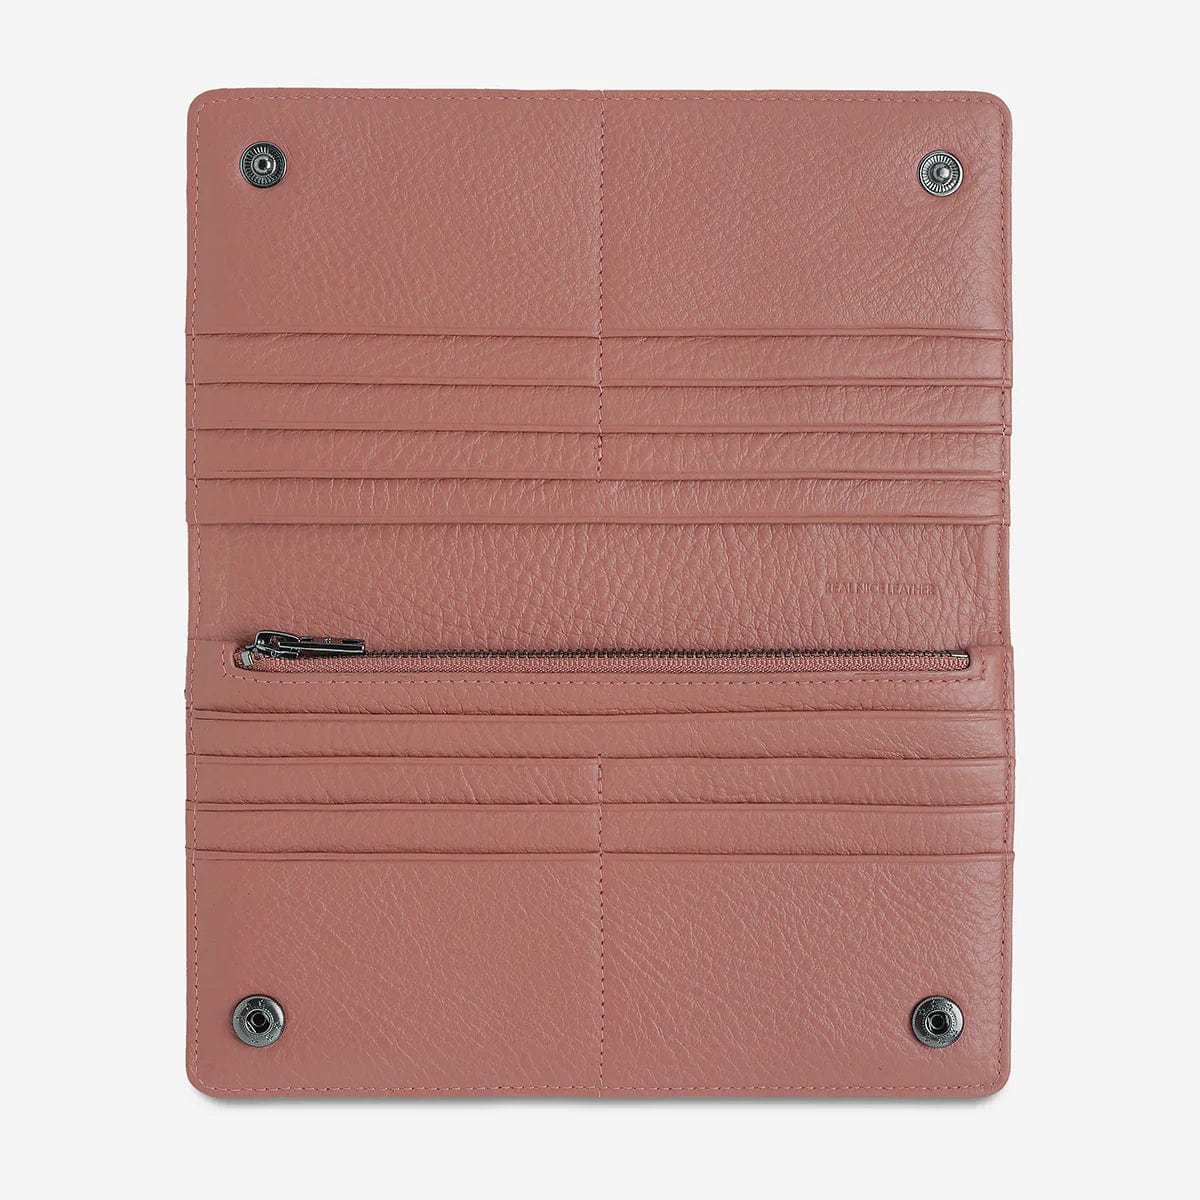 Status Anxiety Bags Status Anxiety | Living Proof Wallet - Dusty Rose